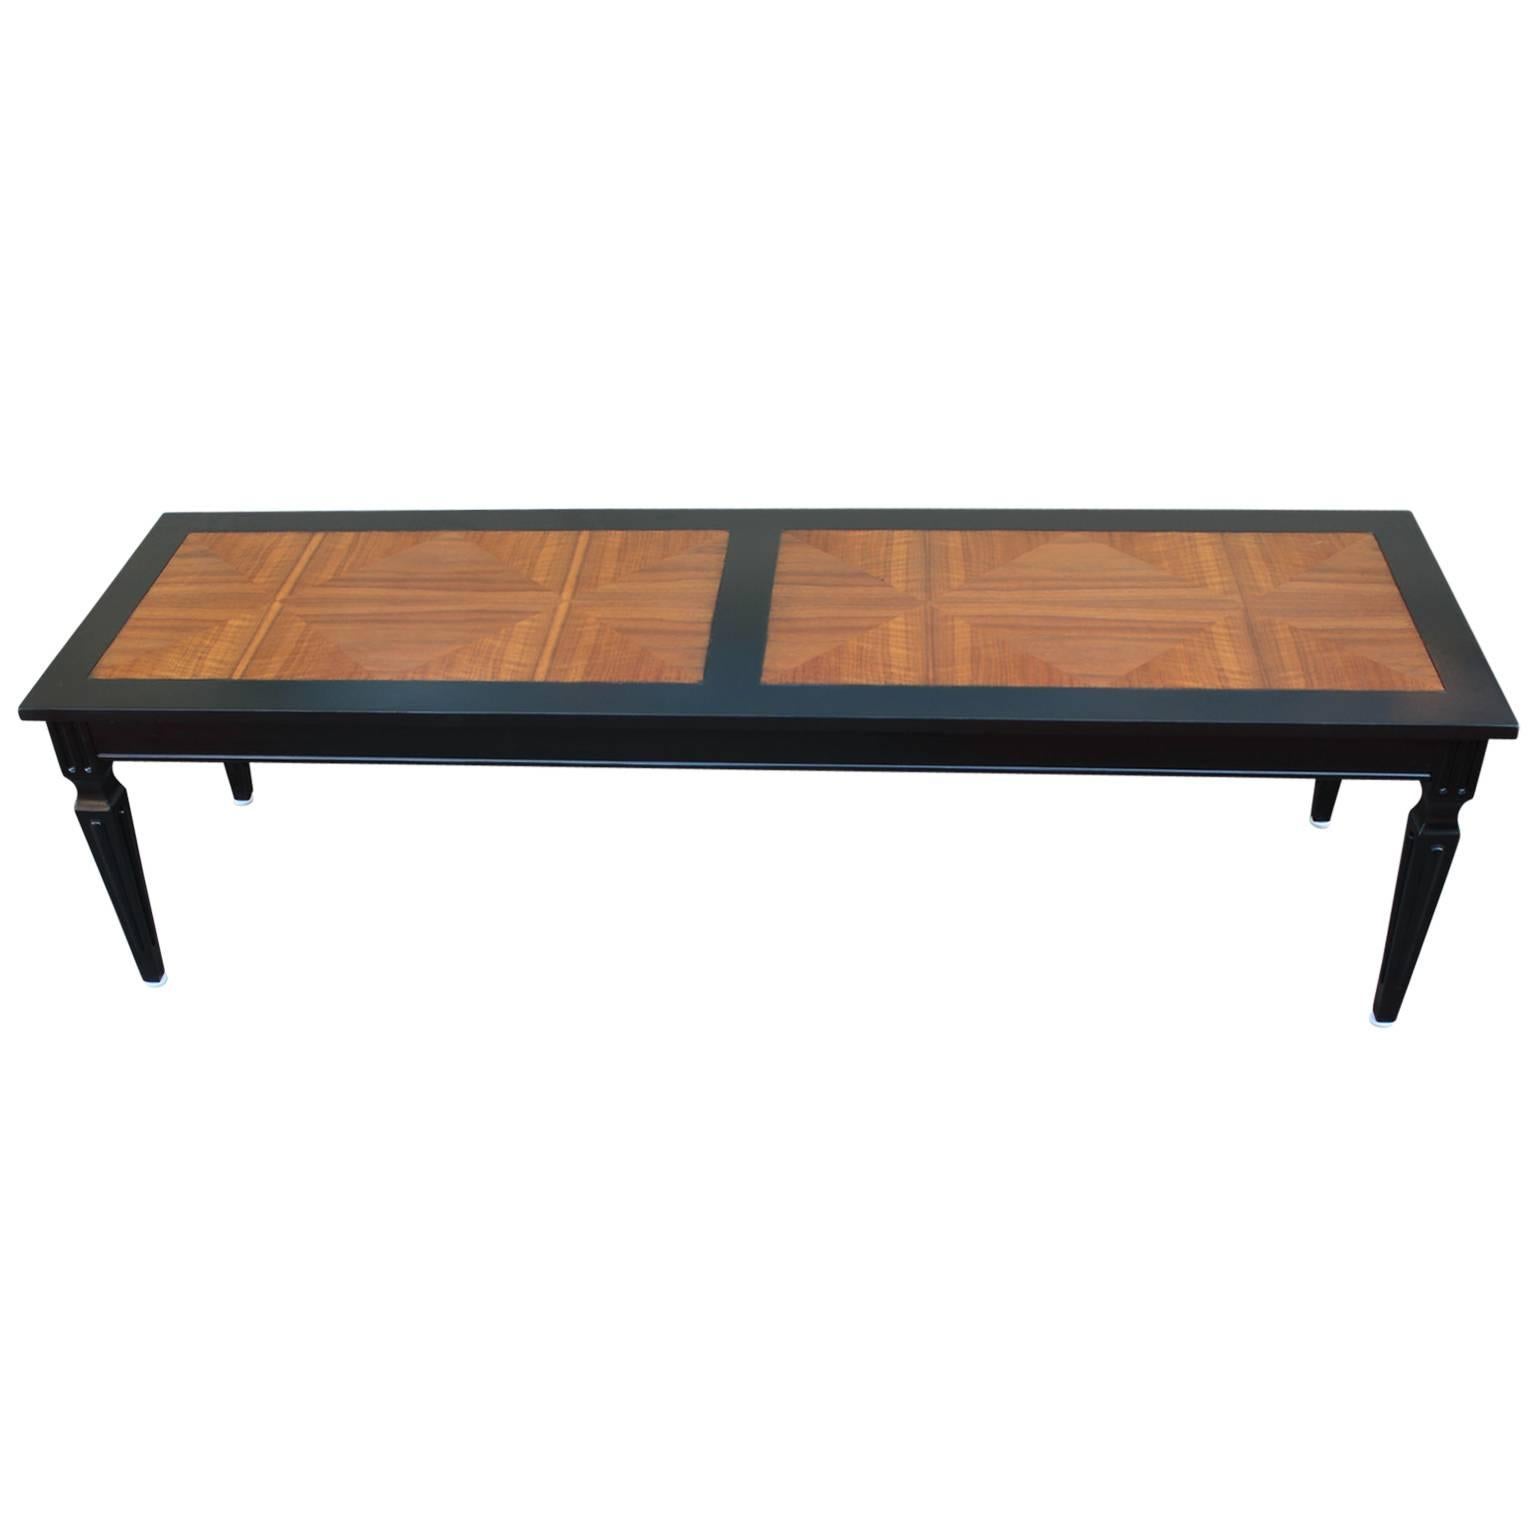 Luxe Parquet and Ebonized Modern Two Tone Coffee Table by Baker